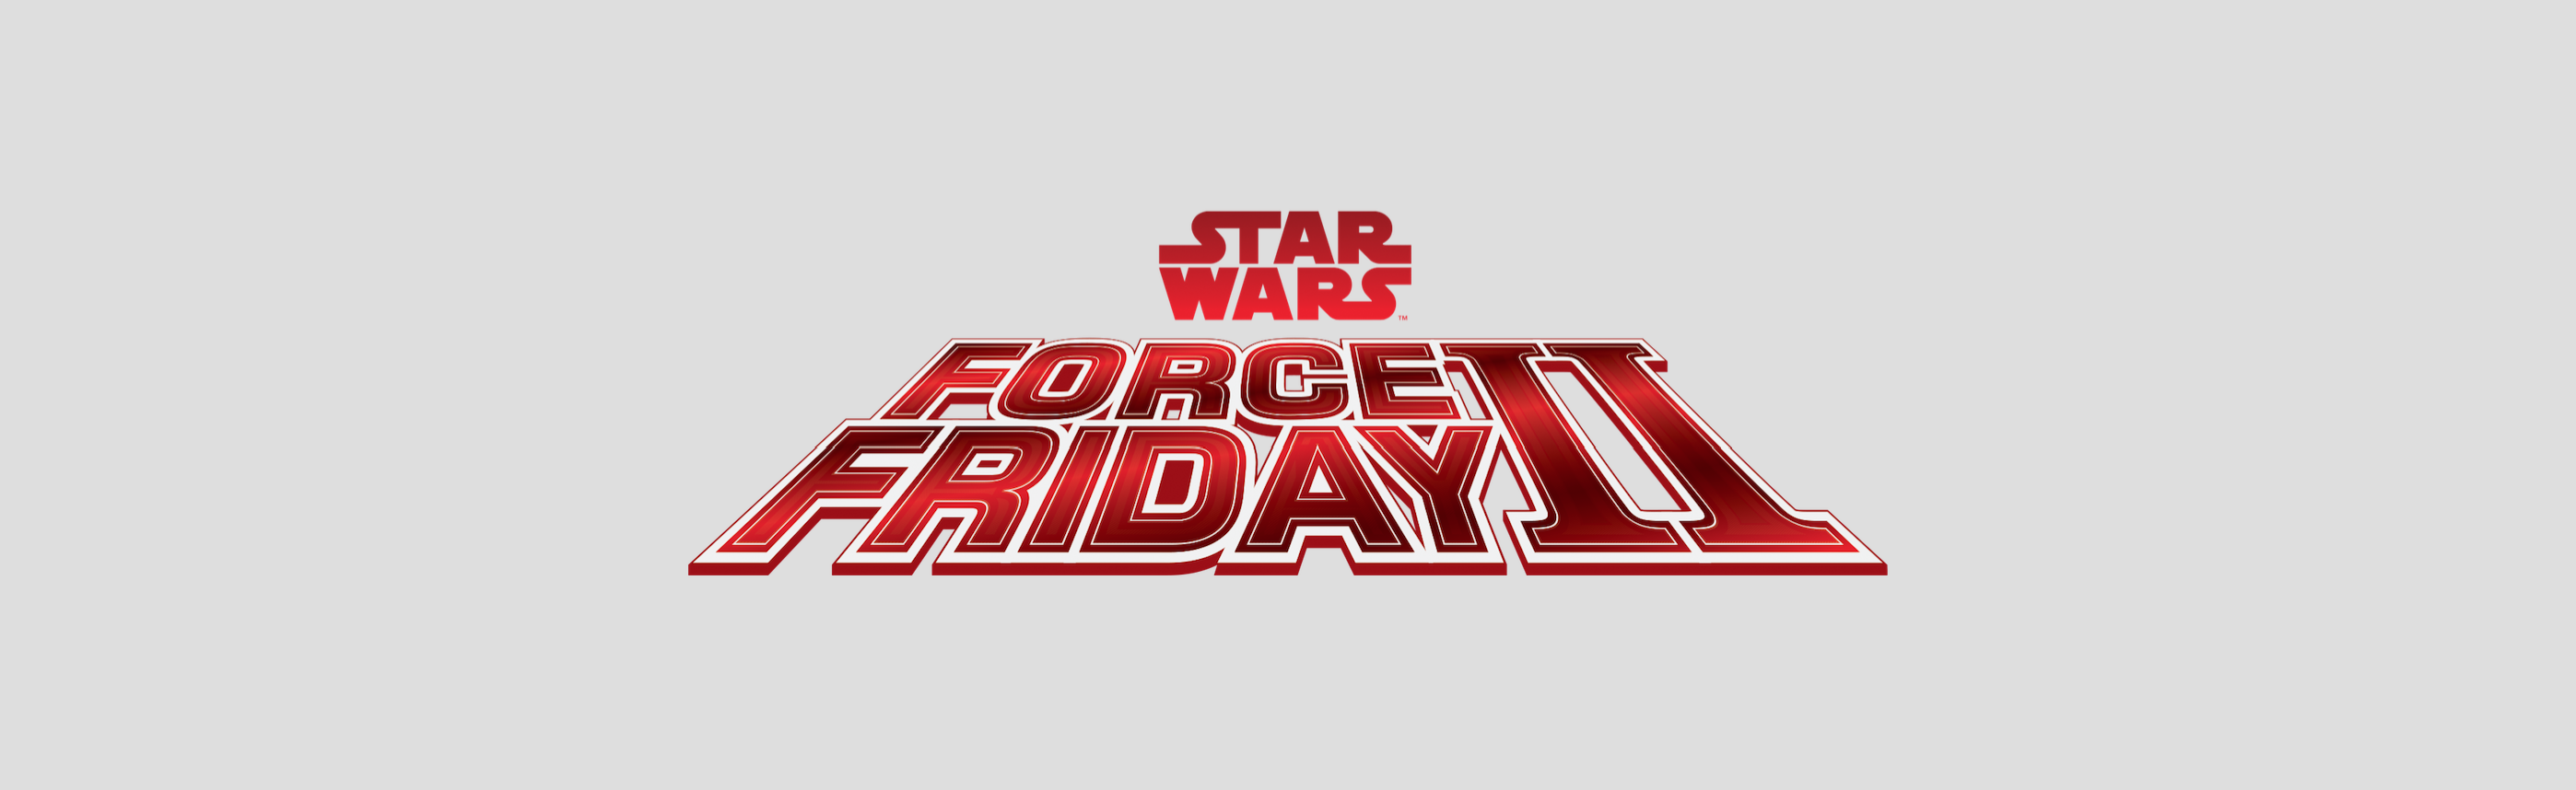 Star Wars Fans Invited to â€œFind the Forceâ€ As Unprecedented Augmented Reality Event Sweeps the Globe for  Force Friday II